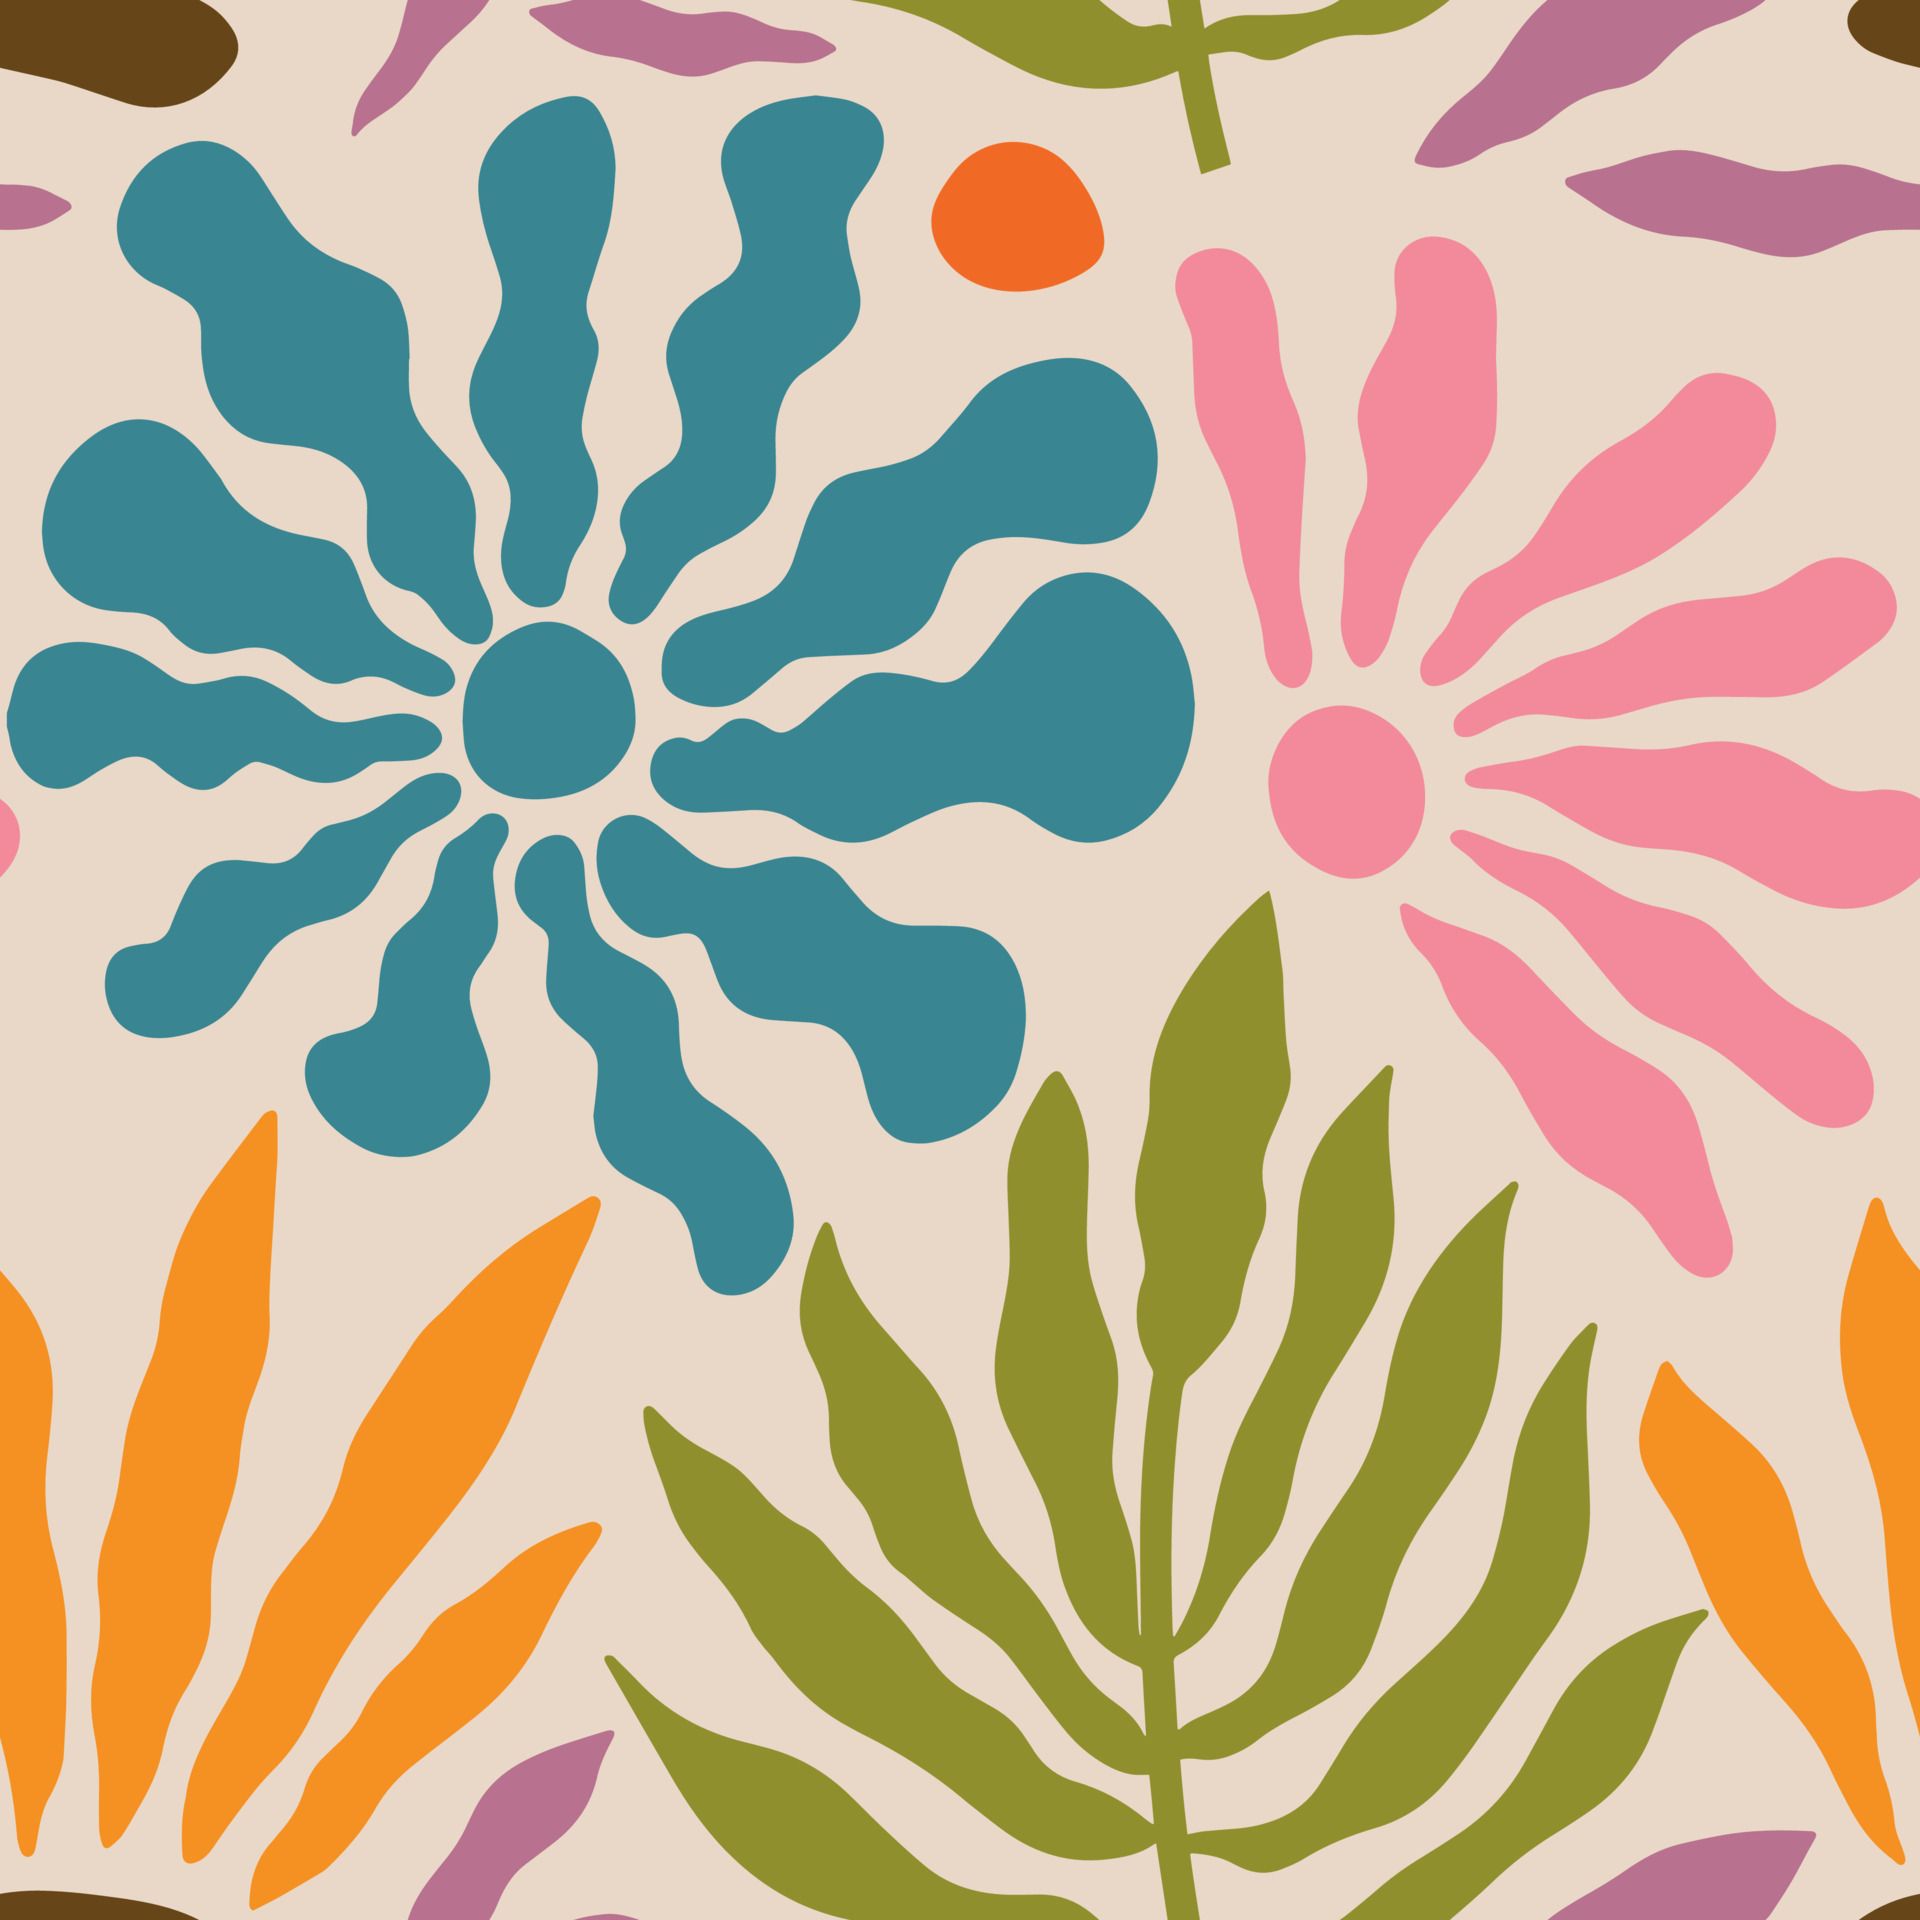 A pattern with blue, pink, orange, and green flowers and leaves on a beige background - Vintage, 70s